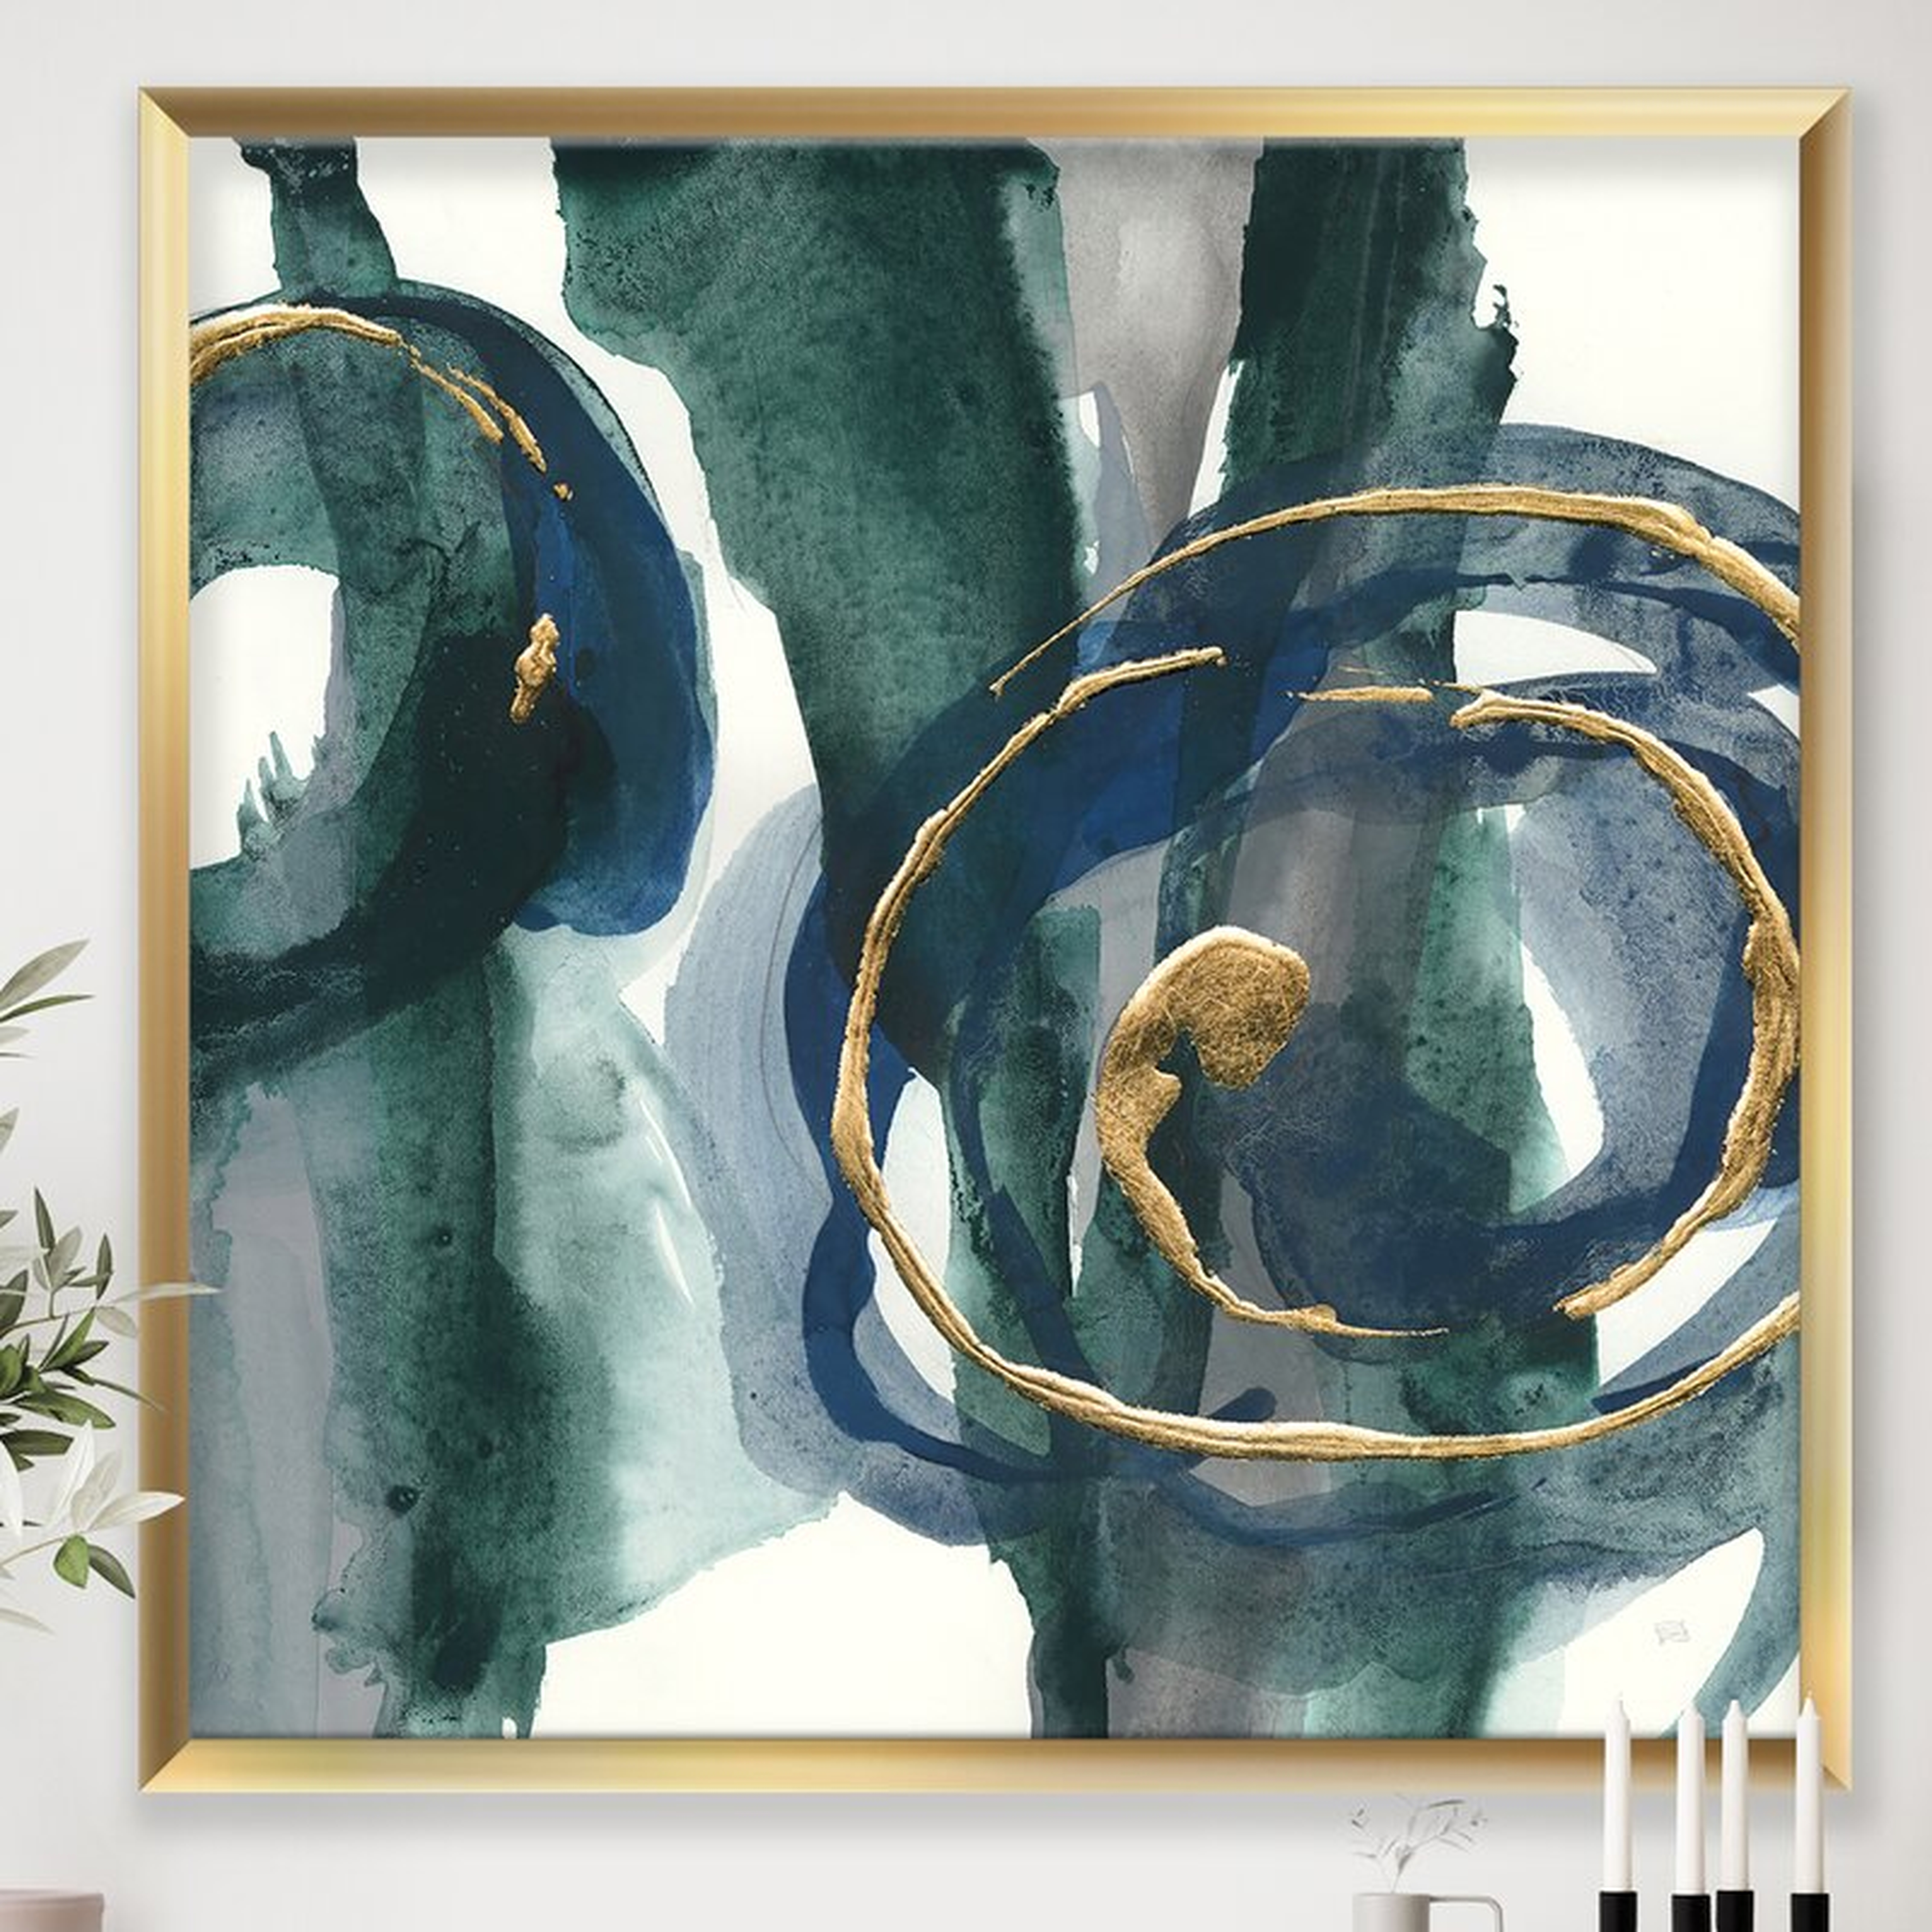 Mettalic Indigo And Gold III - Picture Frame Print on Canvas - Wayfair